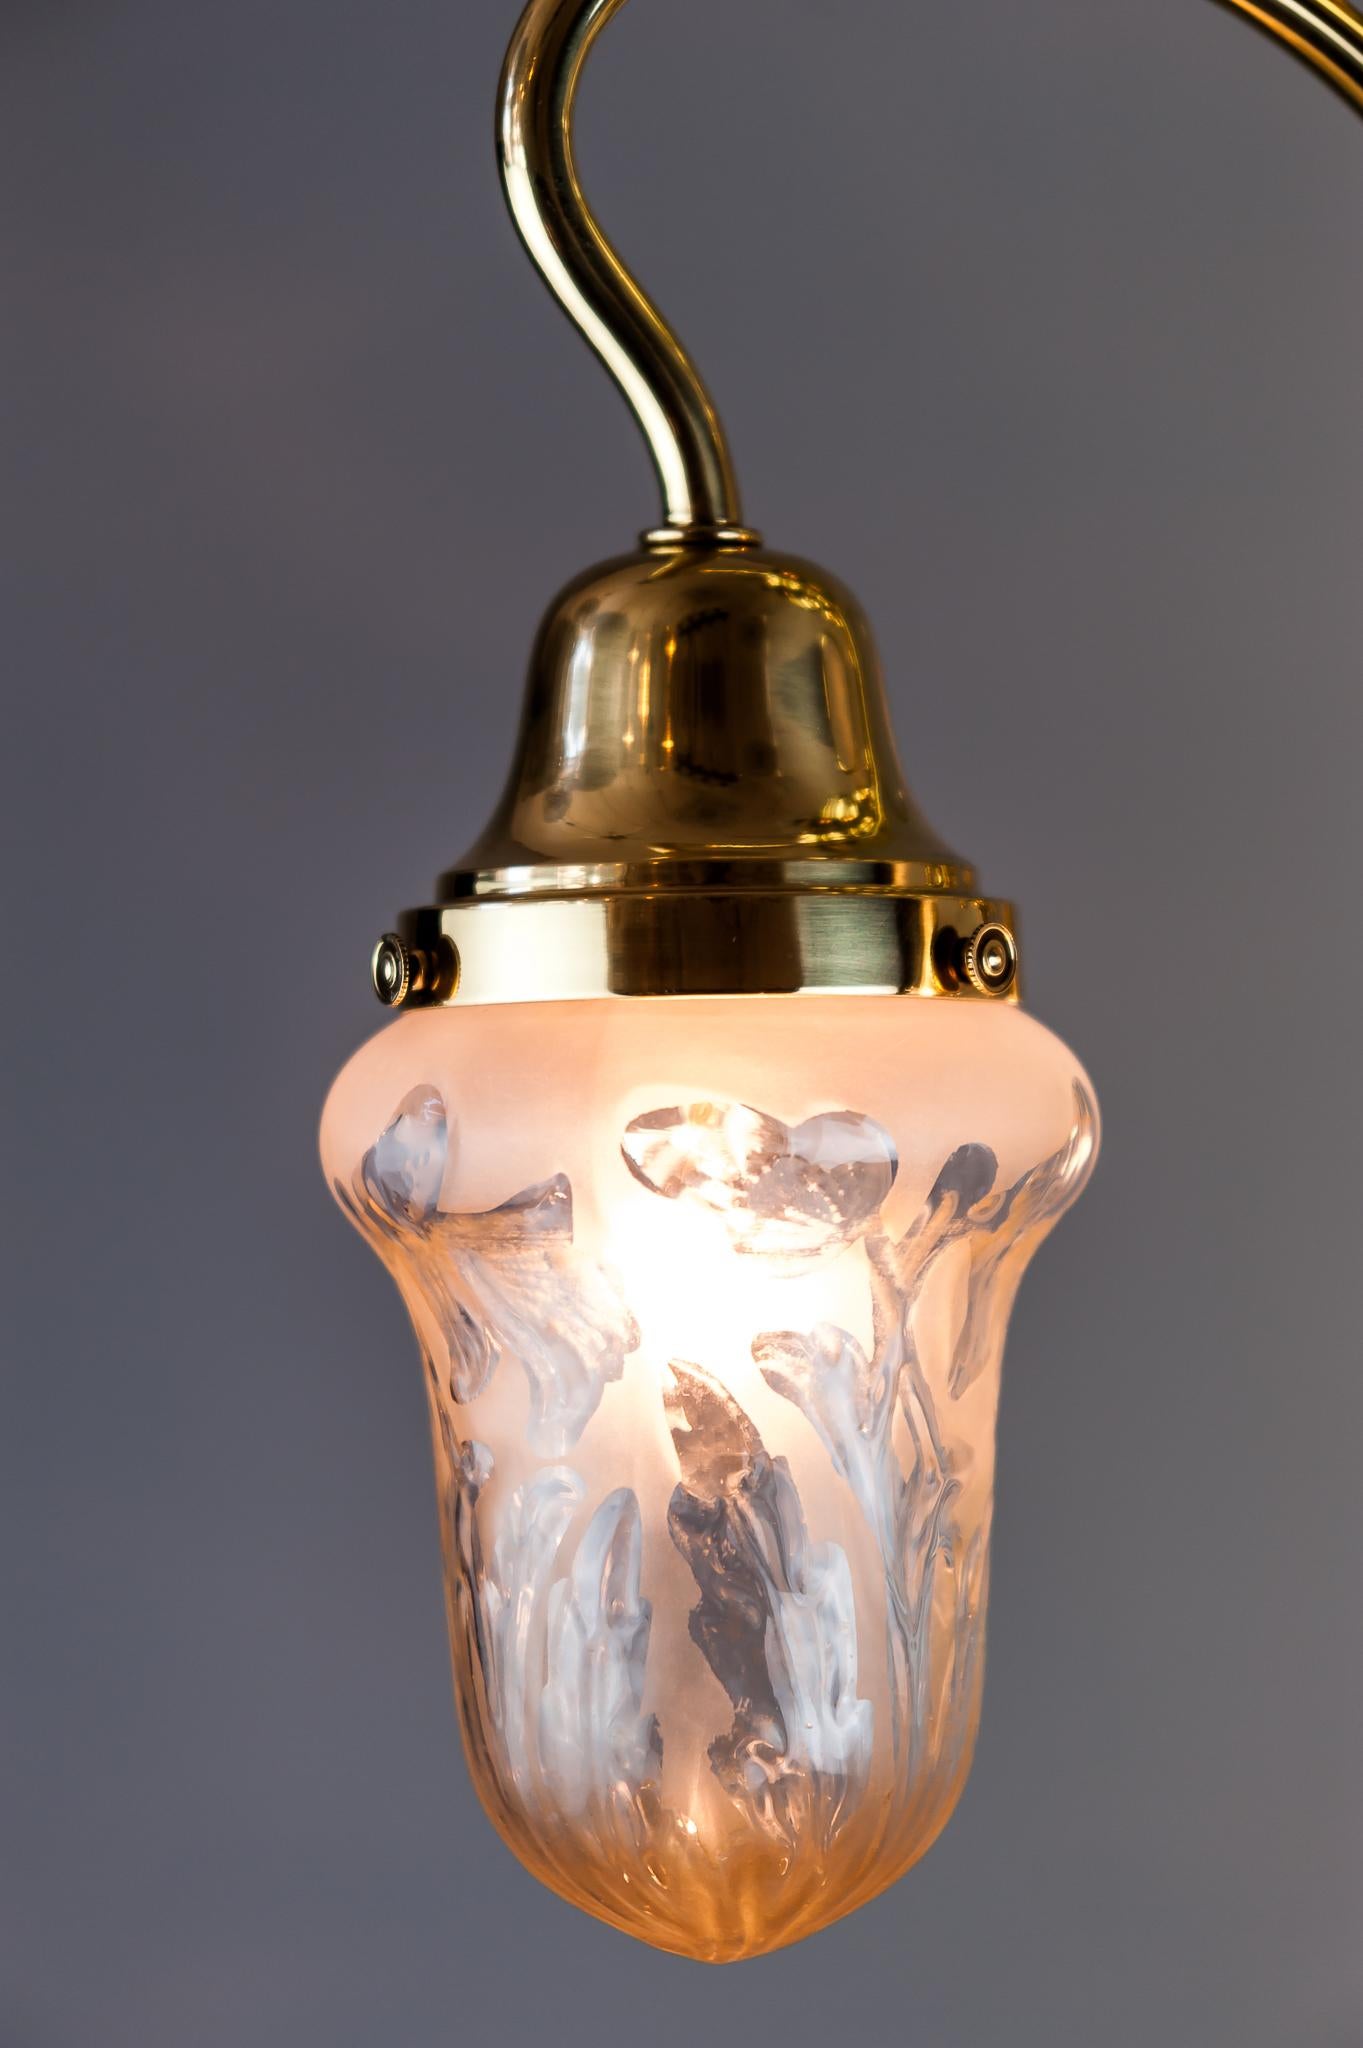 Early 20th Century Jugendstil Ceiling Lamp, circa 1908 with Original Glass Shades